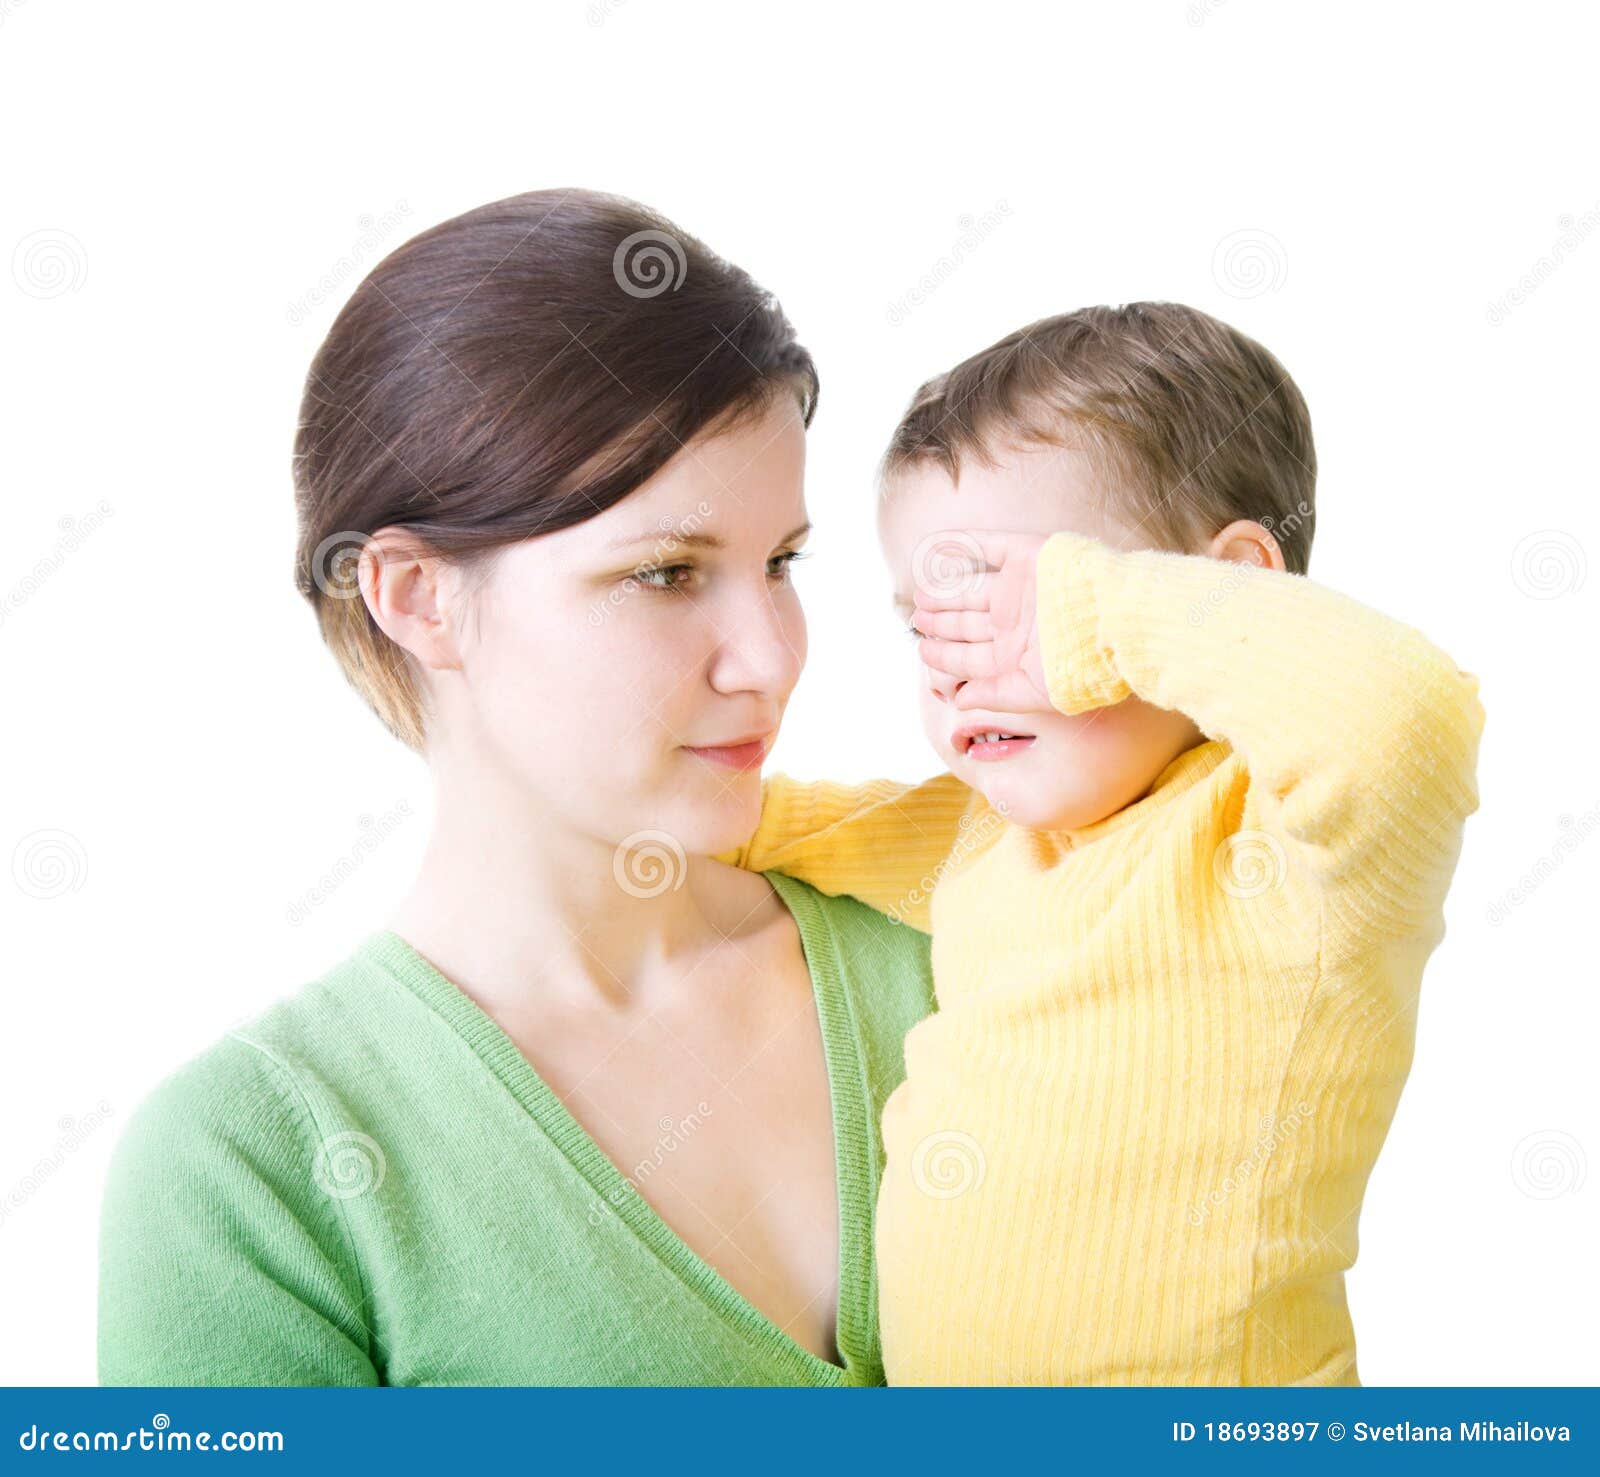 woman with crying child